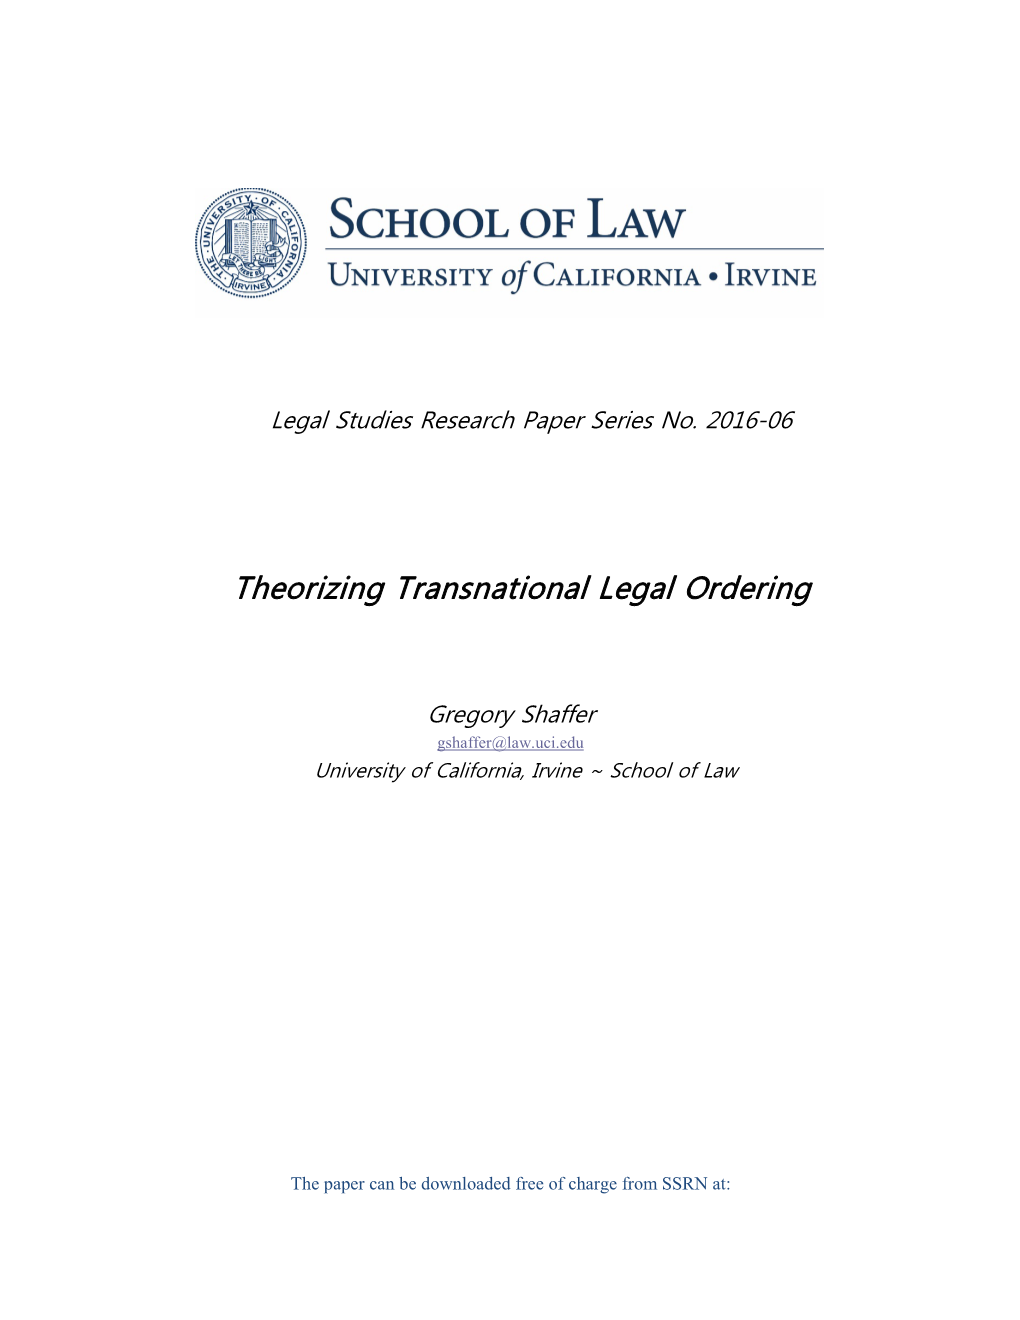 Theorizing Transnational Legal Ordering